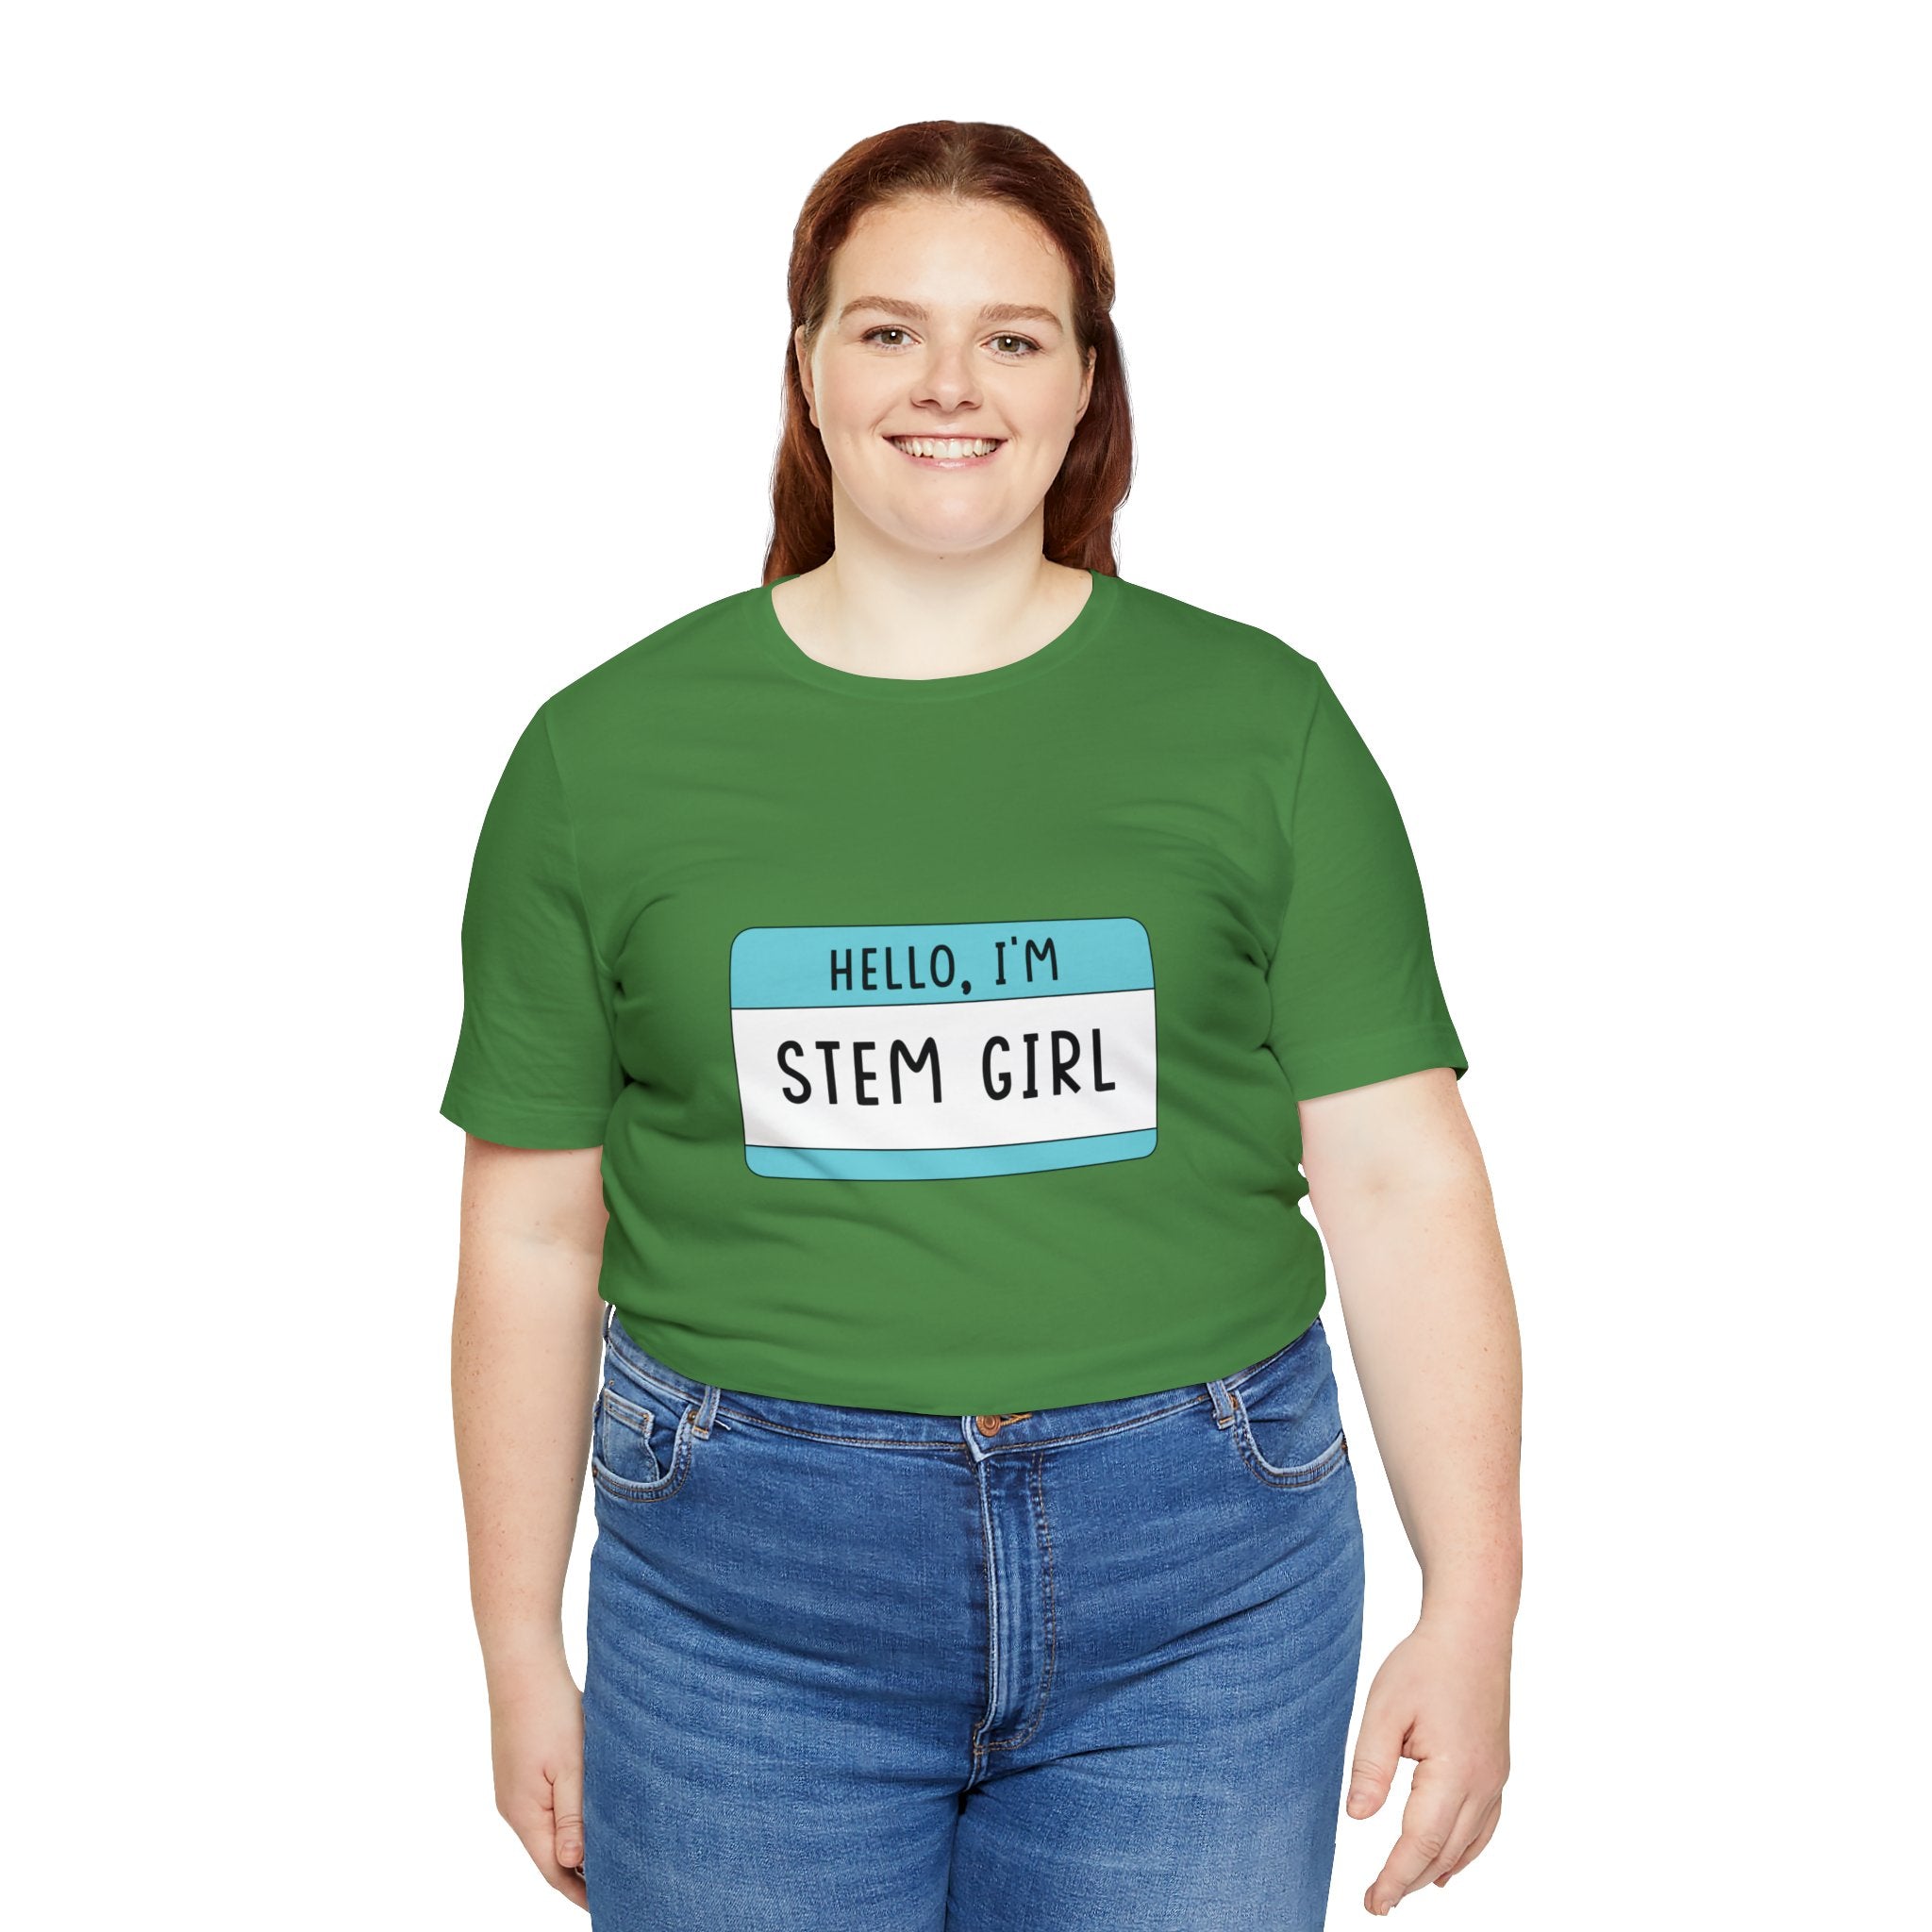 A young woman in a Hello, I'm Stem Girl T-Shirt, smiling at the camera against a white background.